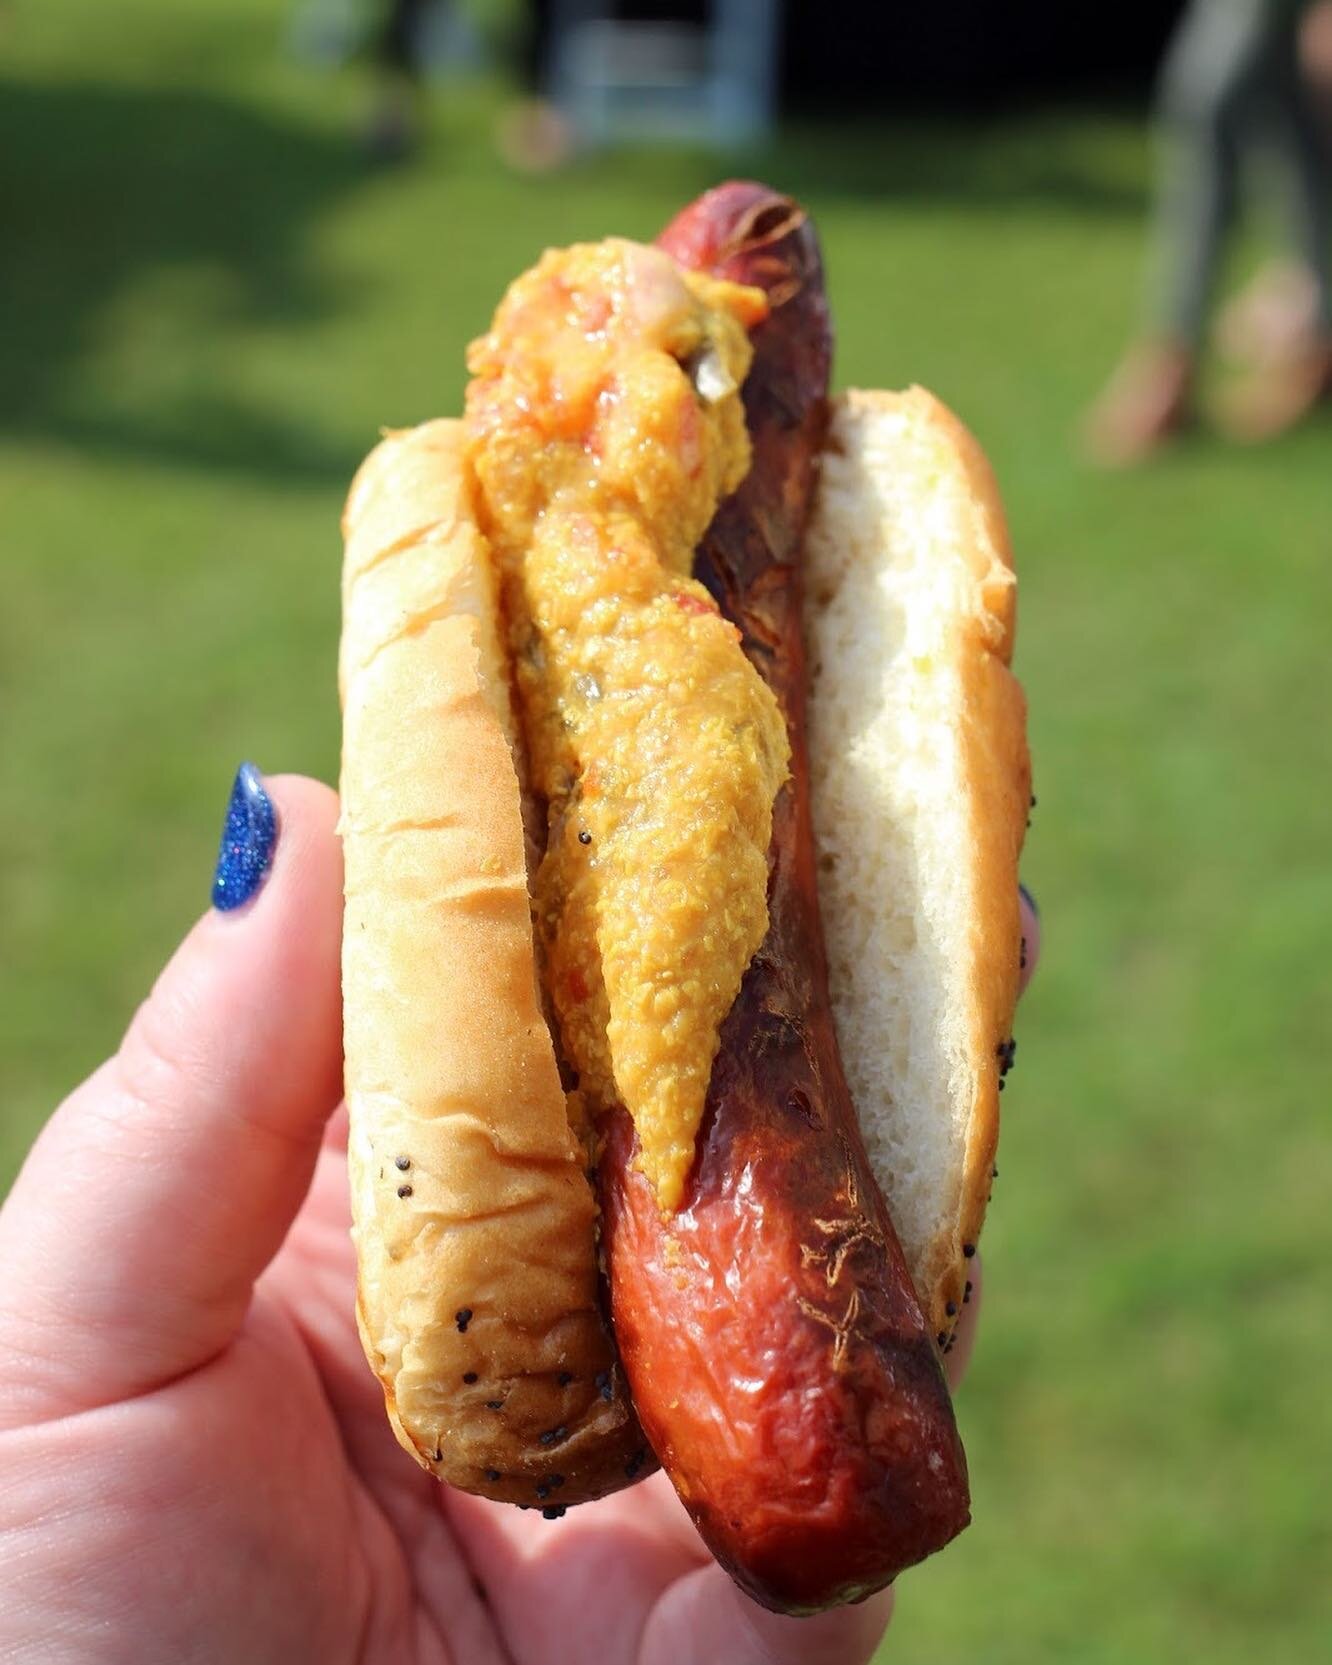 It&rsquo;s #NationalHotDogDay and we're still reminiscing about @chefhickey of @duckinnchicago&rsquo;s incredible Duck Fat Hot Dog at a recent Chicago Gourmet, thanks to a delicious photo from one of our fav influencers, @chicagofoodiegirl 🌭 Who's p